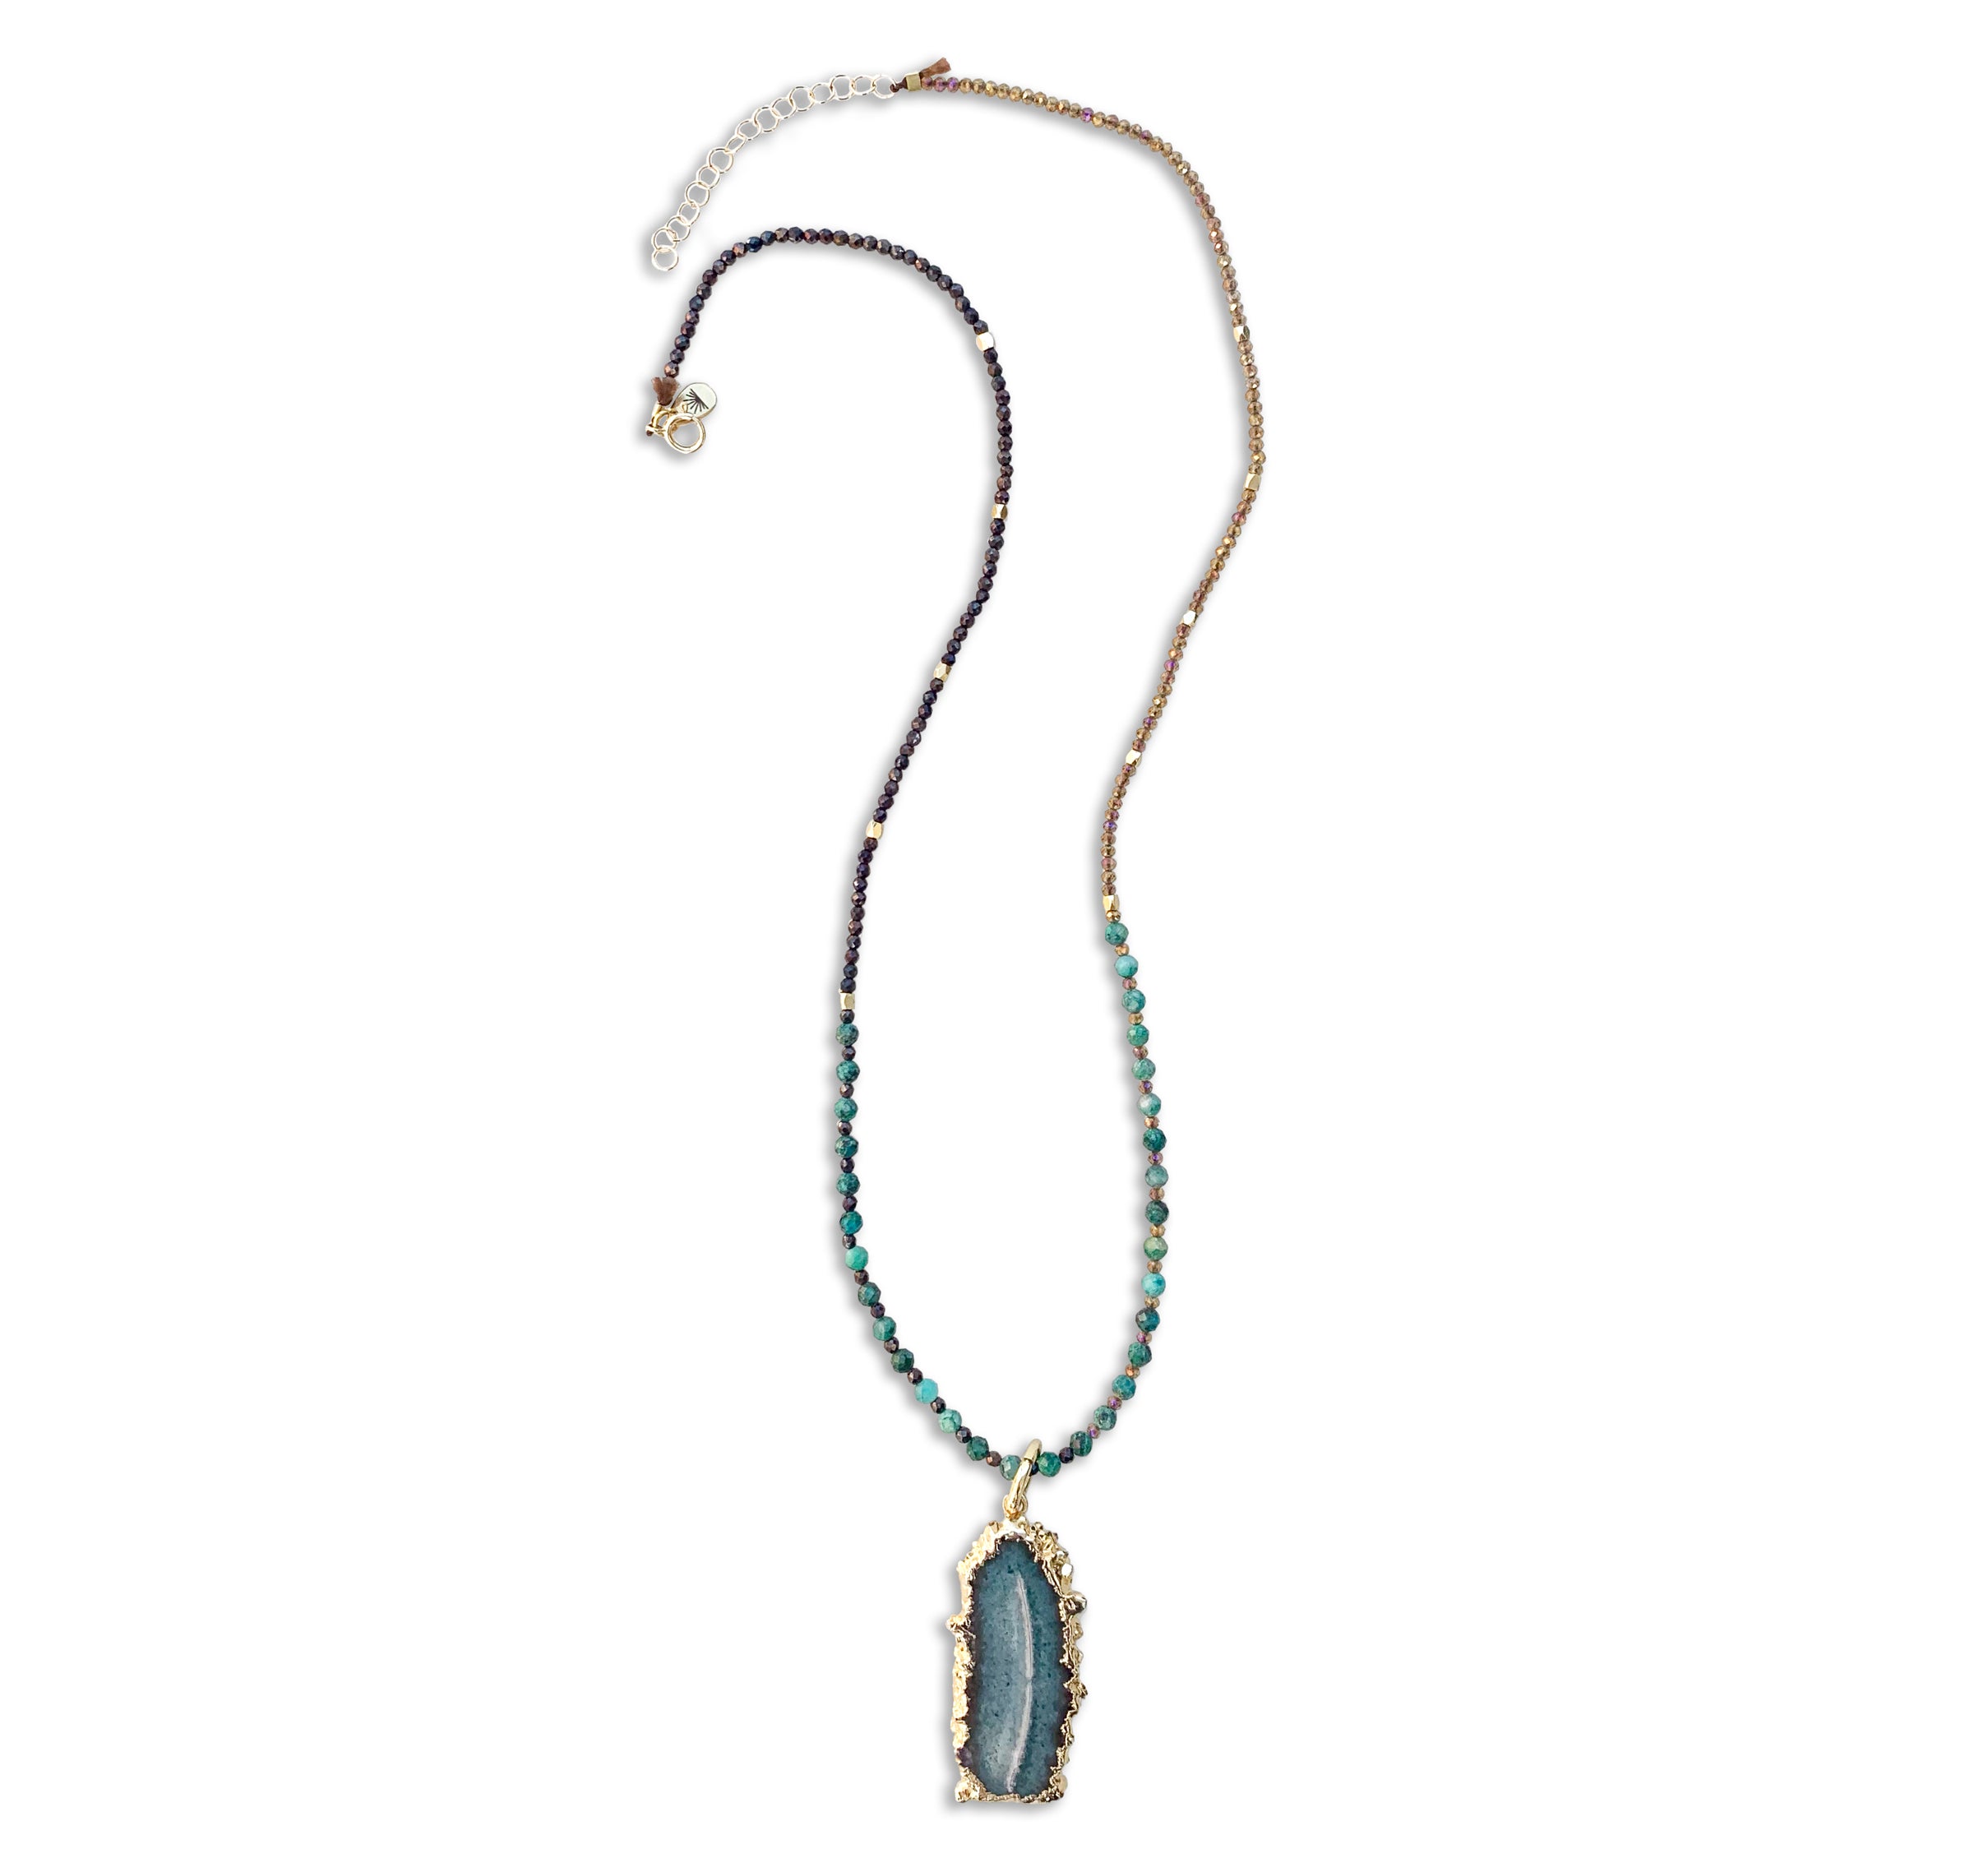 Cast-of-Stones-Chrysocolla-Necklace-with-Stalactite-Large-Charm